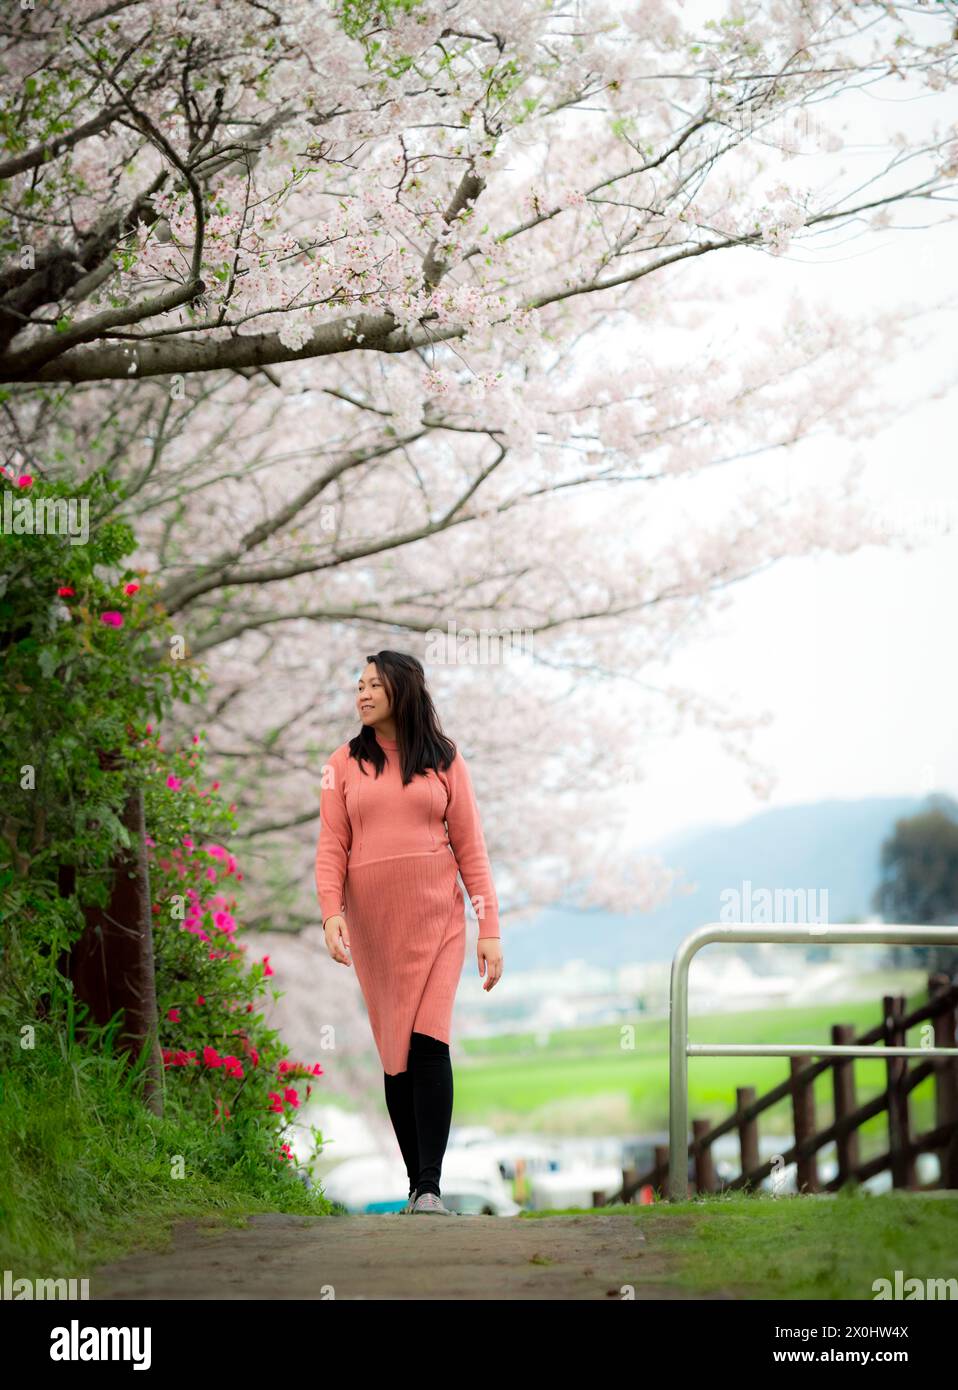 A happy pregnant woman strolling underneath the cherry blossom or sakura trees in spring. Stock Photo